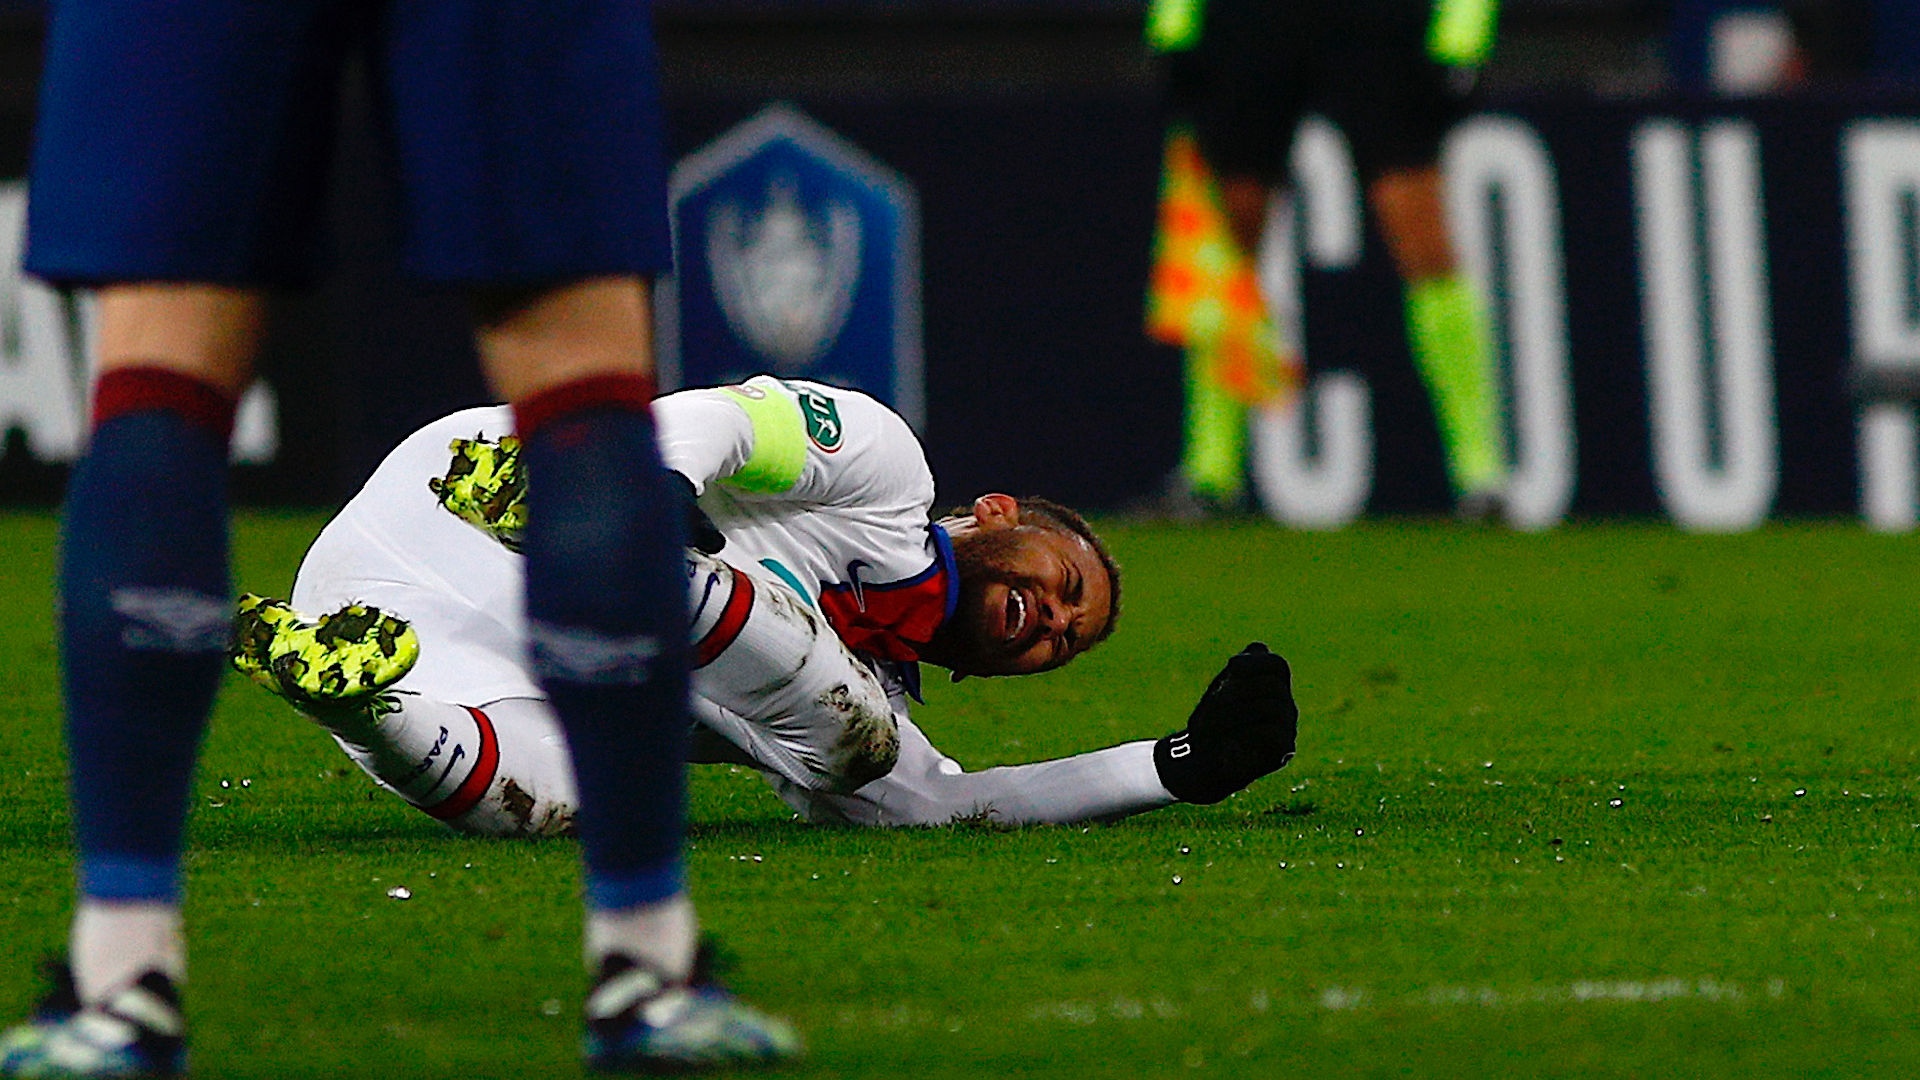 PSG star Neymar in doubt for Barcelona Champions League clash after injury withdrawal